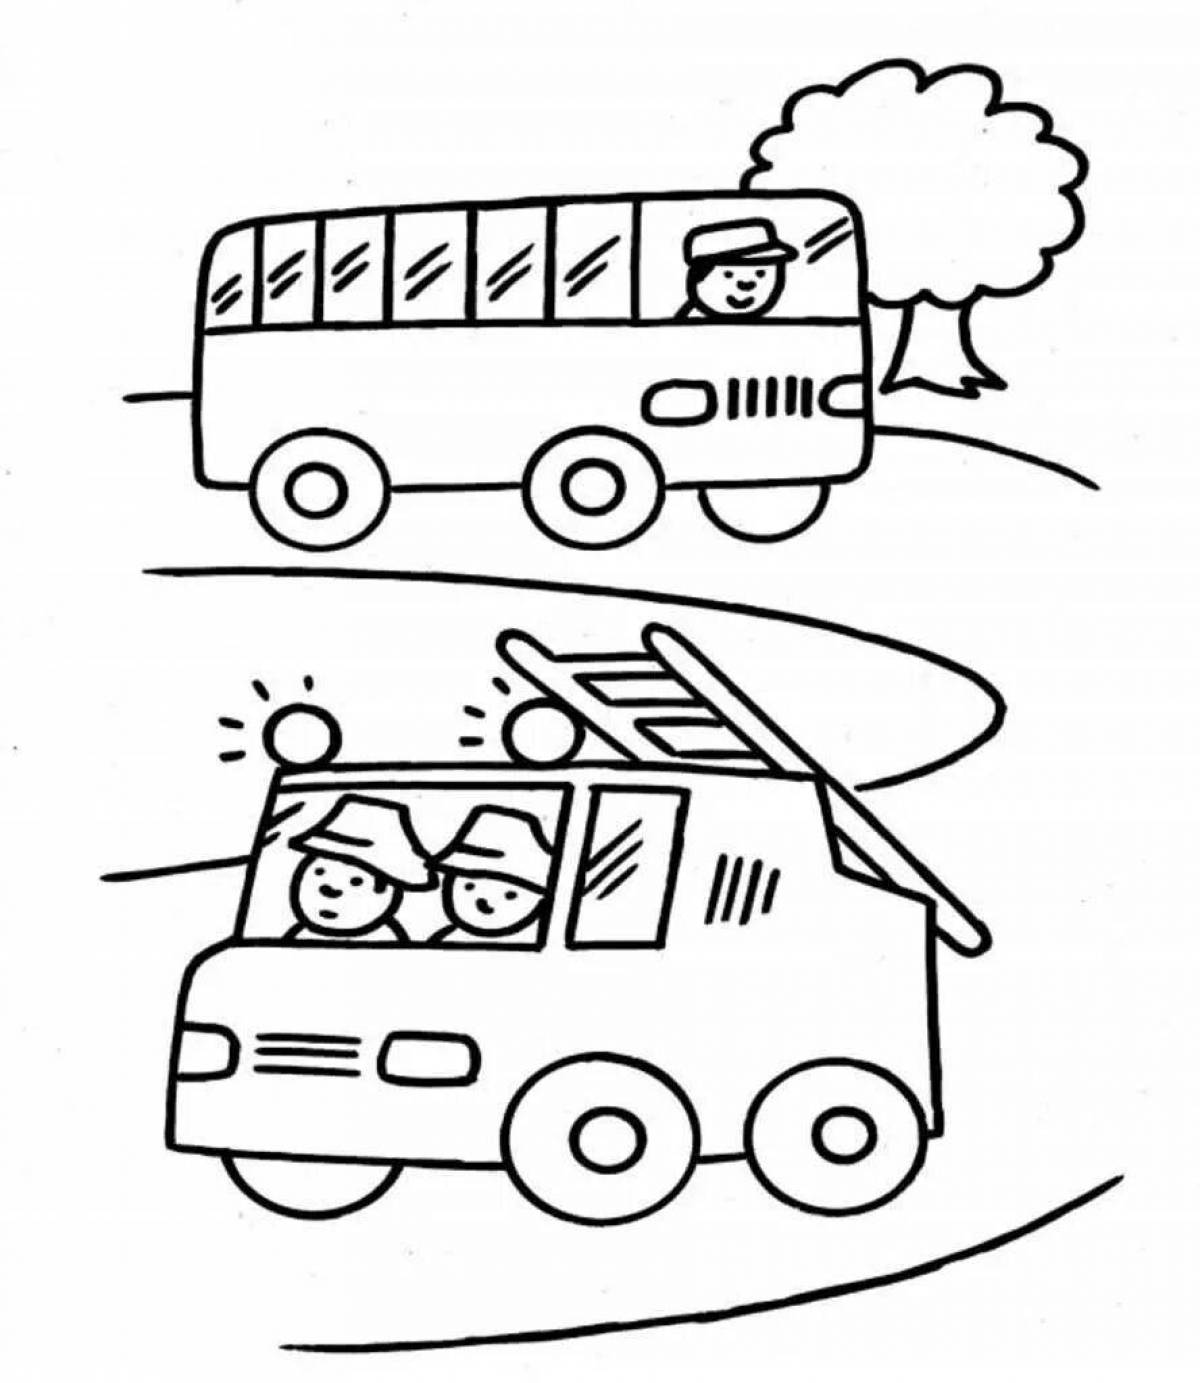 Playful transport coloring book for toddlers 2-3 years old